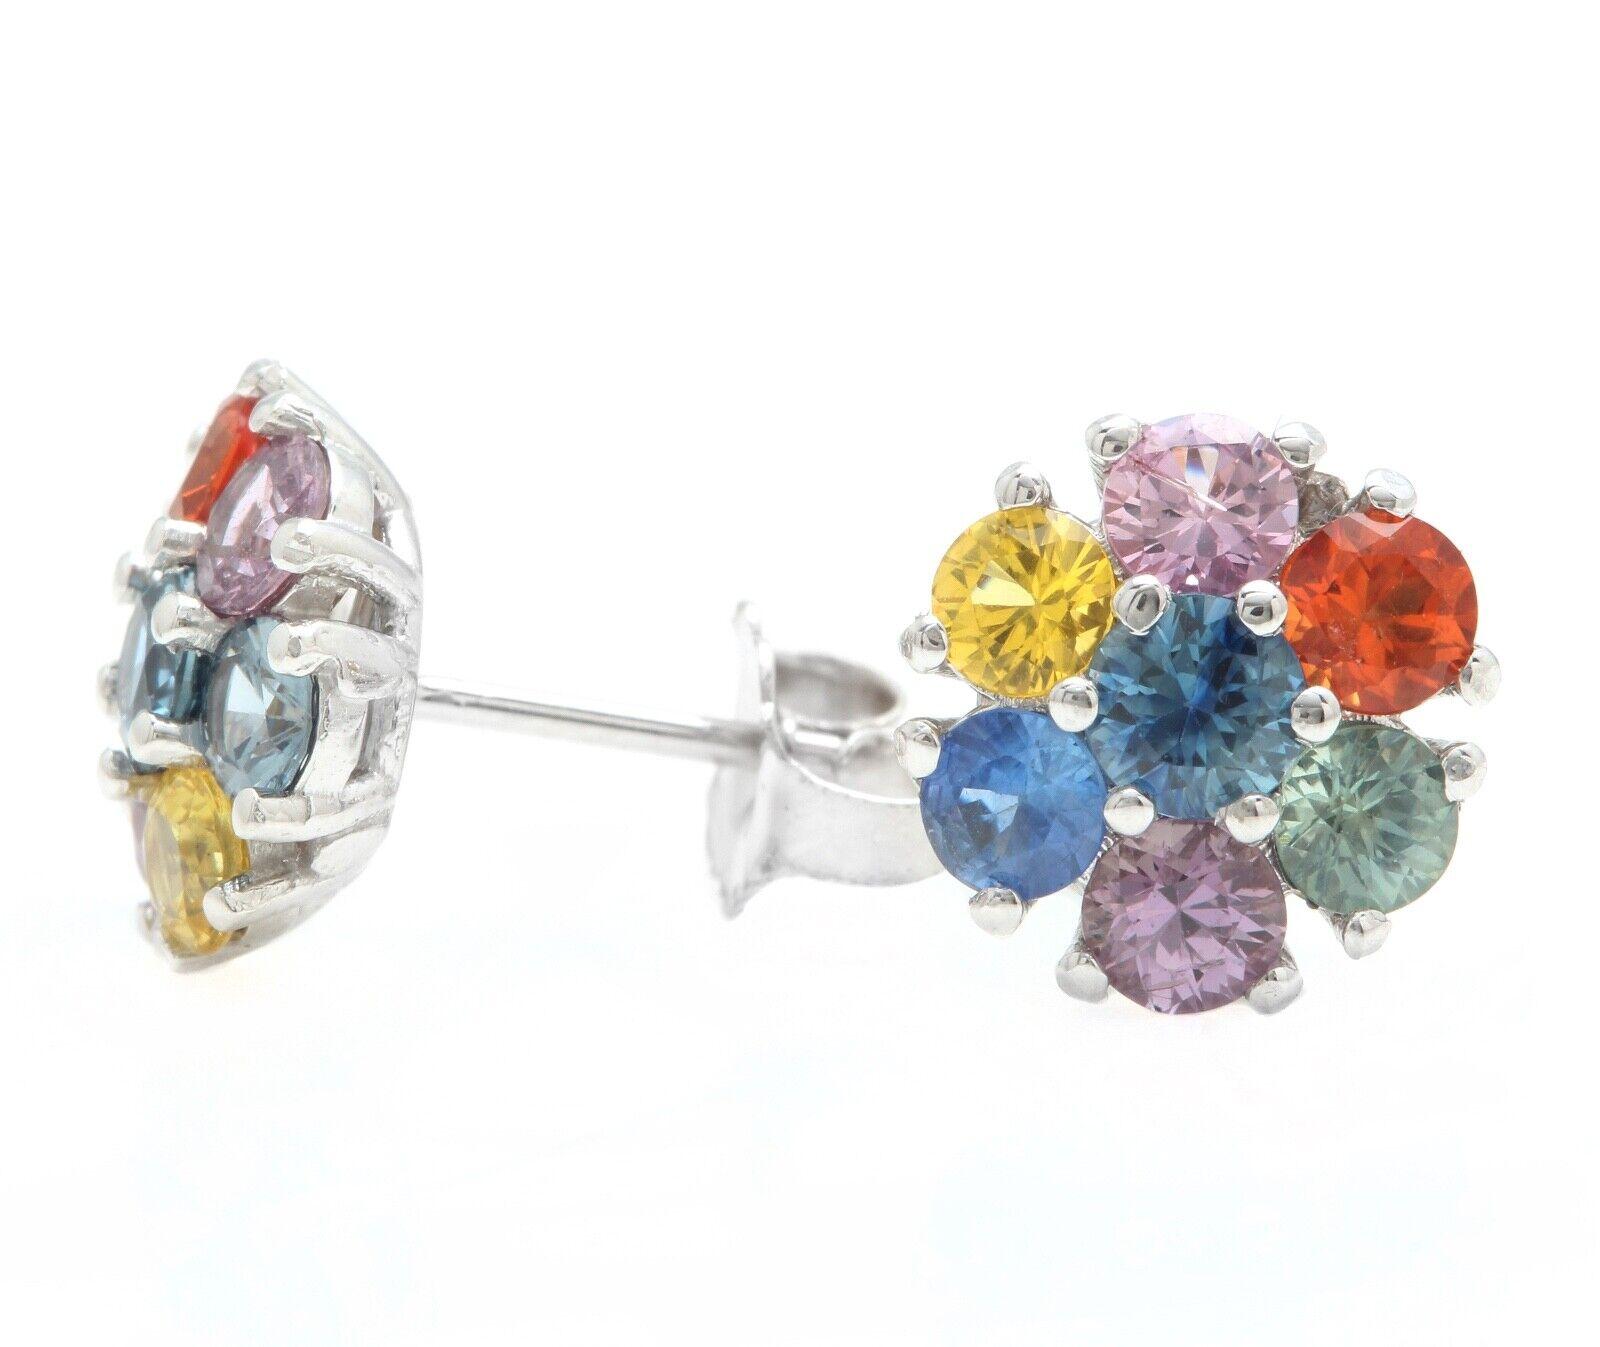 3.00 Carats Natural Multi-Color Sapphire 14K Solid White Gold Stud Earrings

Amazing looking piece! 

Total Natural Round Cut Sapphires Weight is Approx. 3.00 Carats (both earrings)

Earring Measures: Approx. 10.30mm

Total Earrings Weight is: